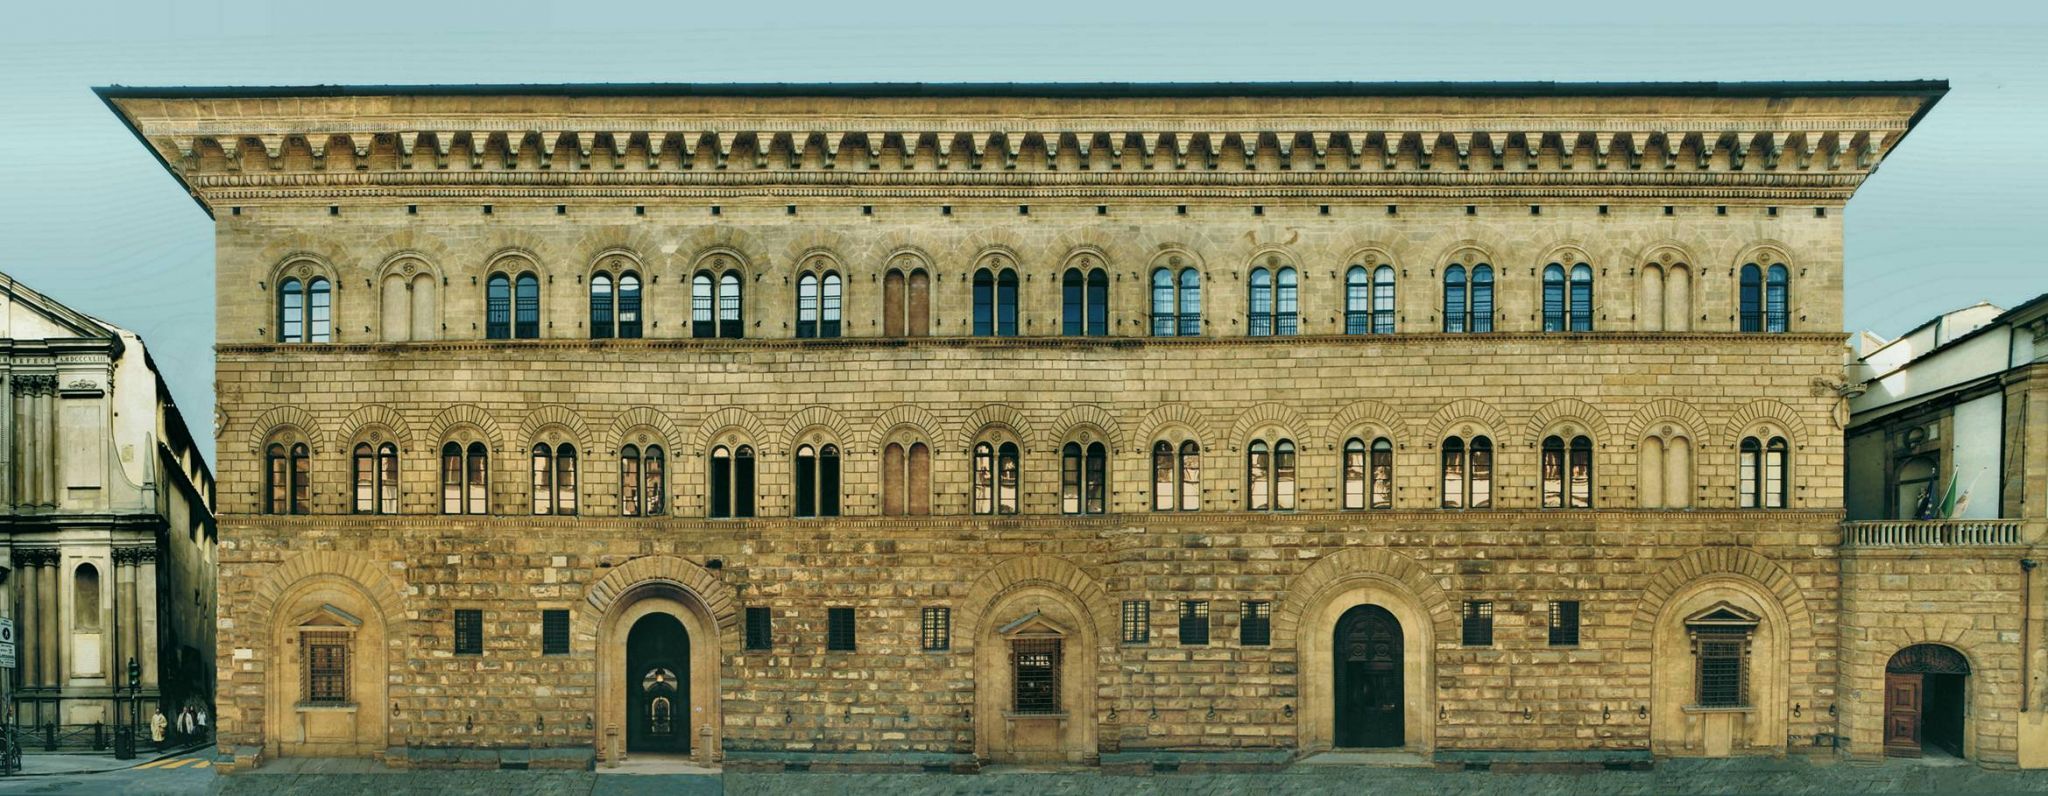 /assets/contentimages/PalazzoMedici.jpg